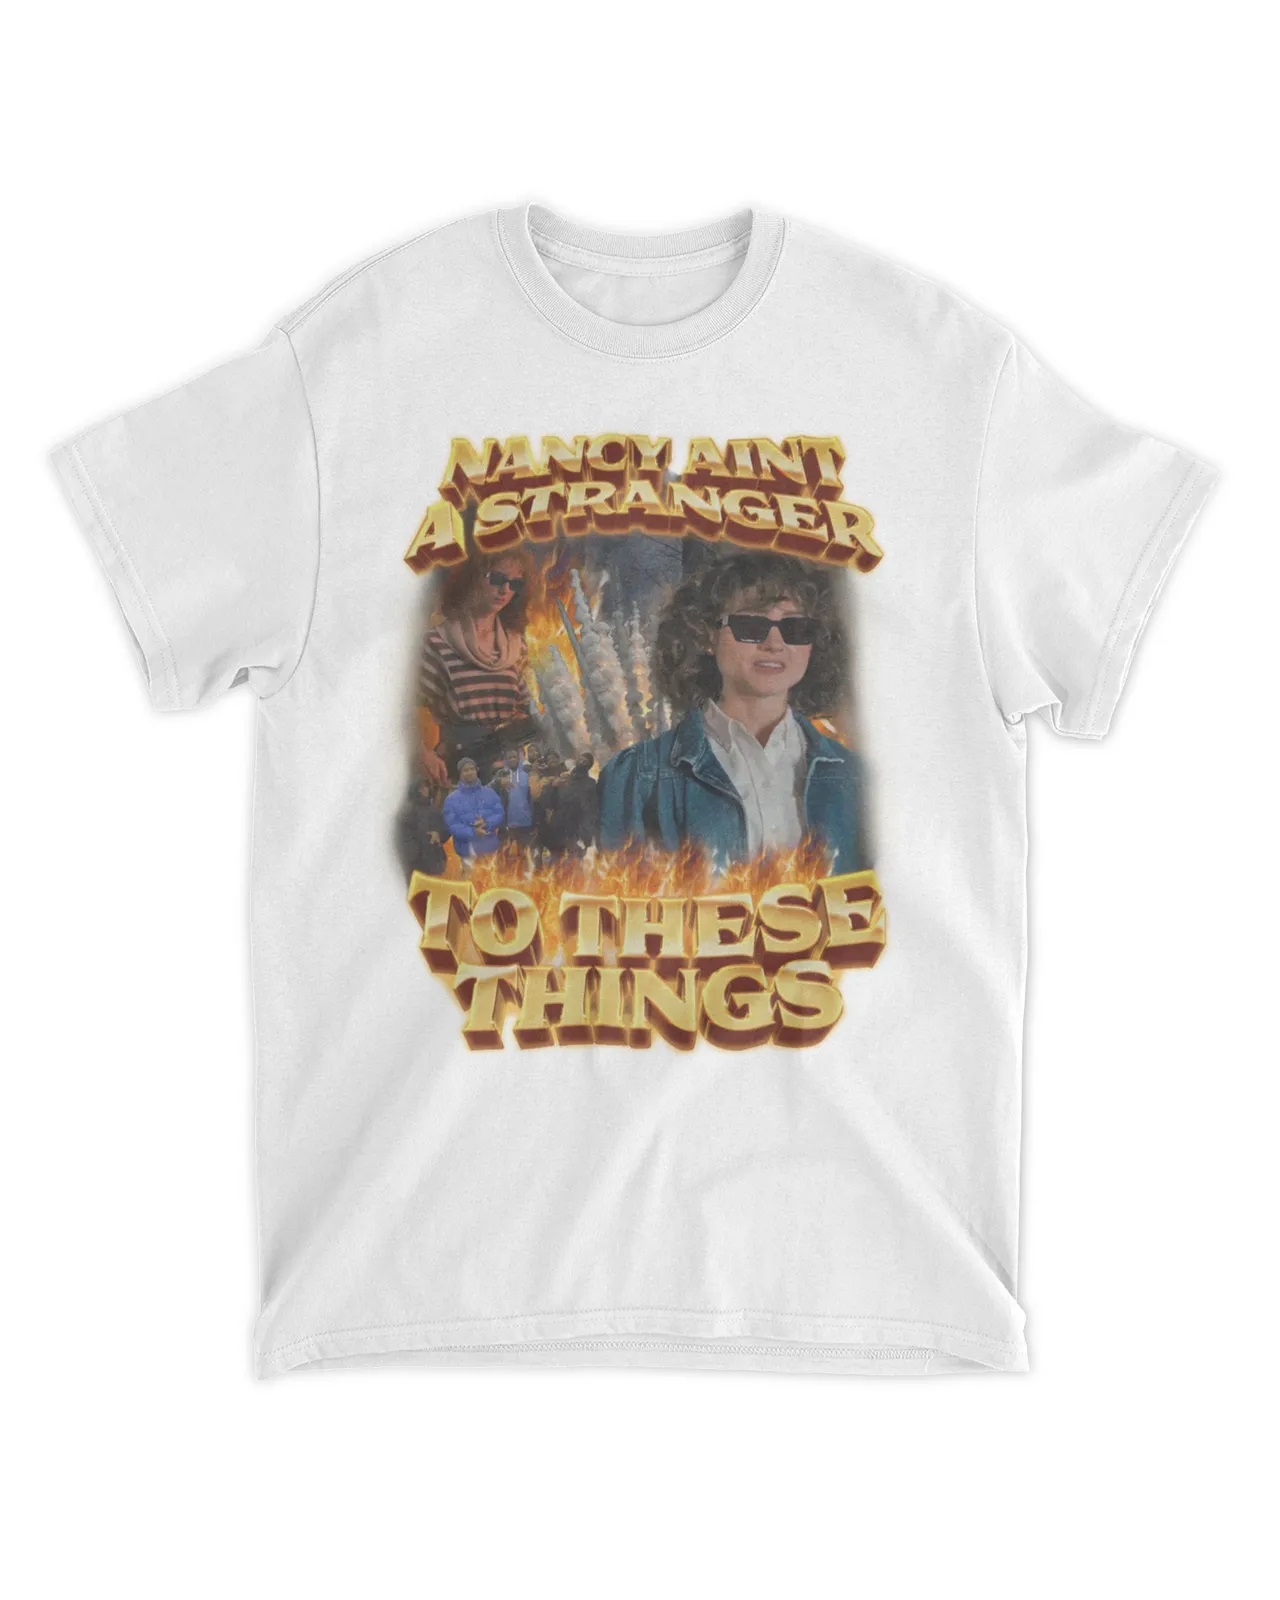 Nancy Ain't A Stranger To These Things Shirt